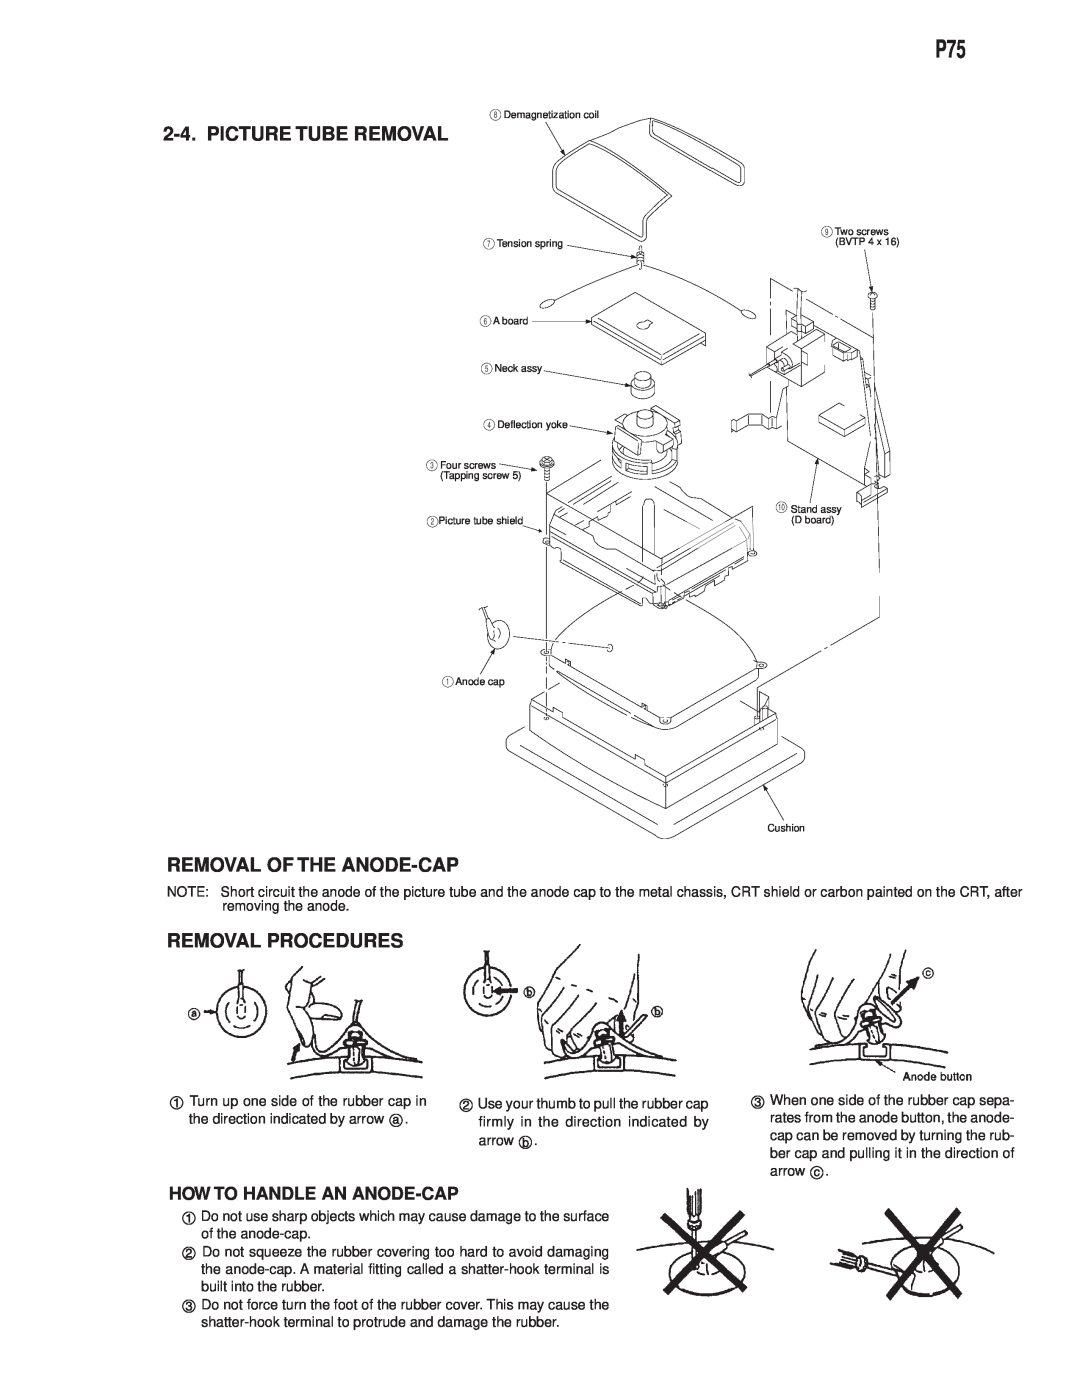 Compaq D-1H specifications Picture Tube Removal, Removal Of The Anode-Cap, Removal Procedures, How To Handle An Anode-Cap 